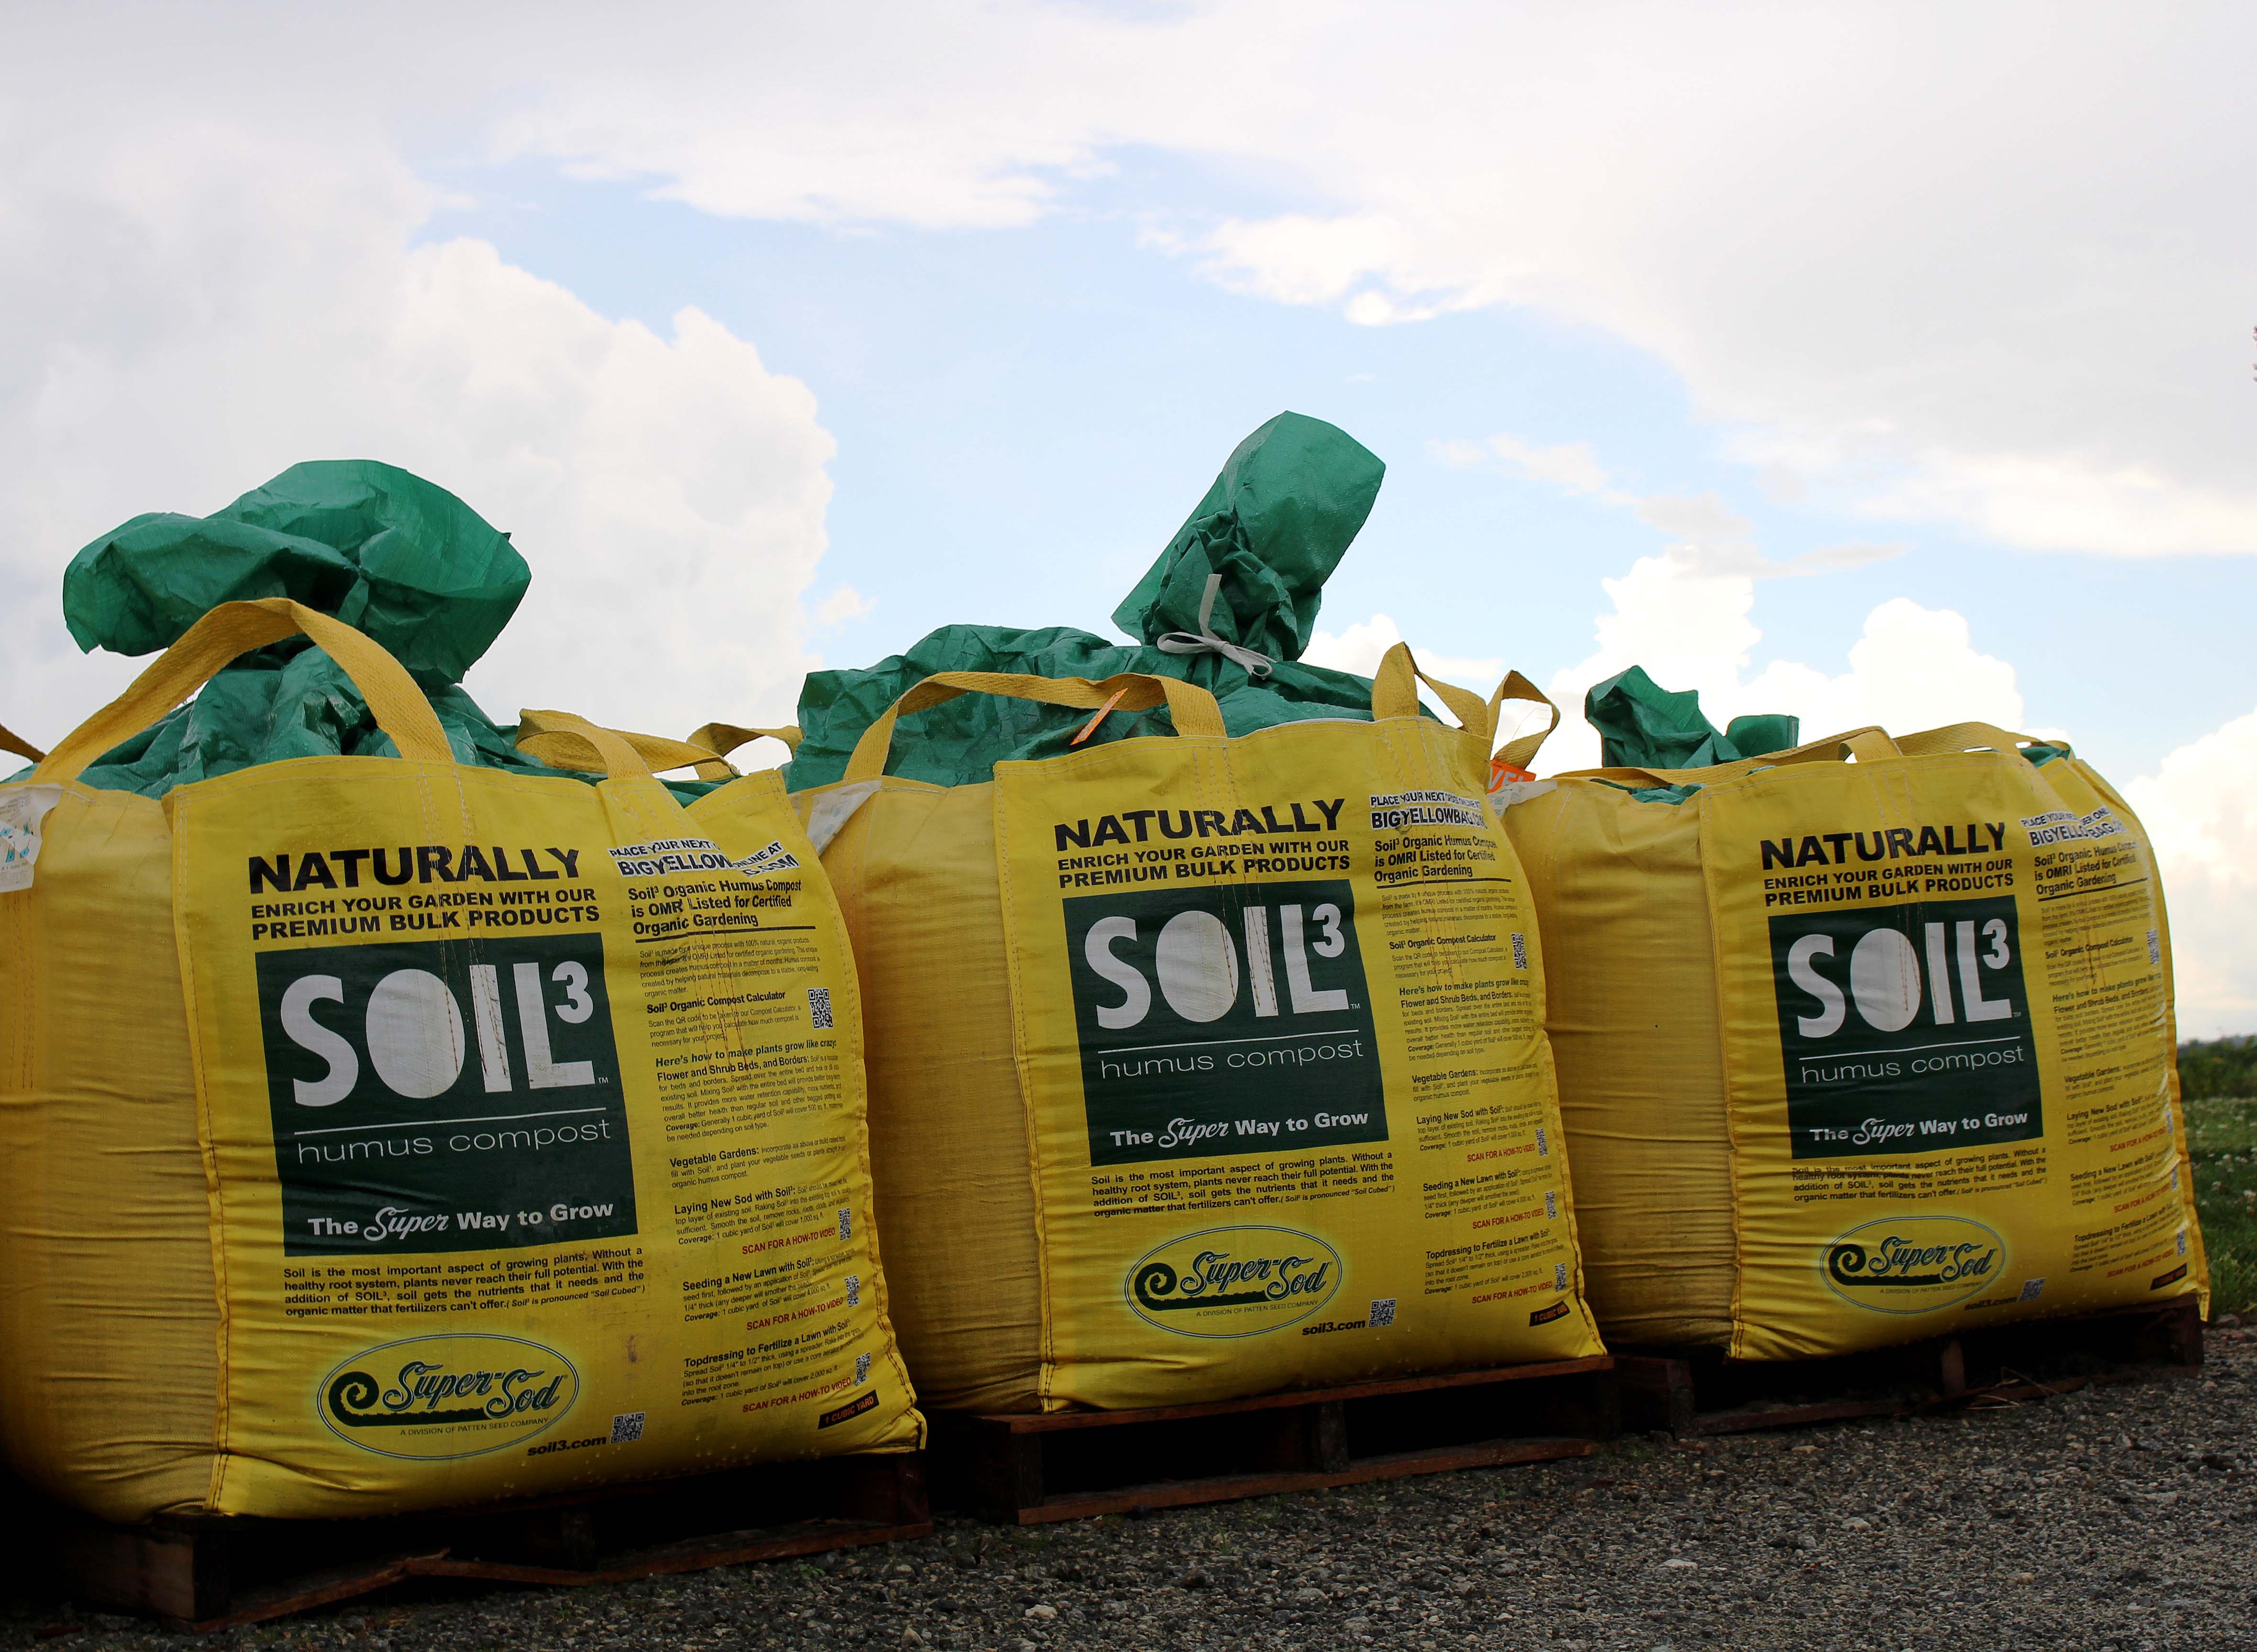 BigYellowBags of Soil3 organic compost hold a cubic yard of soil.